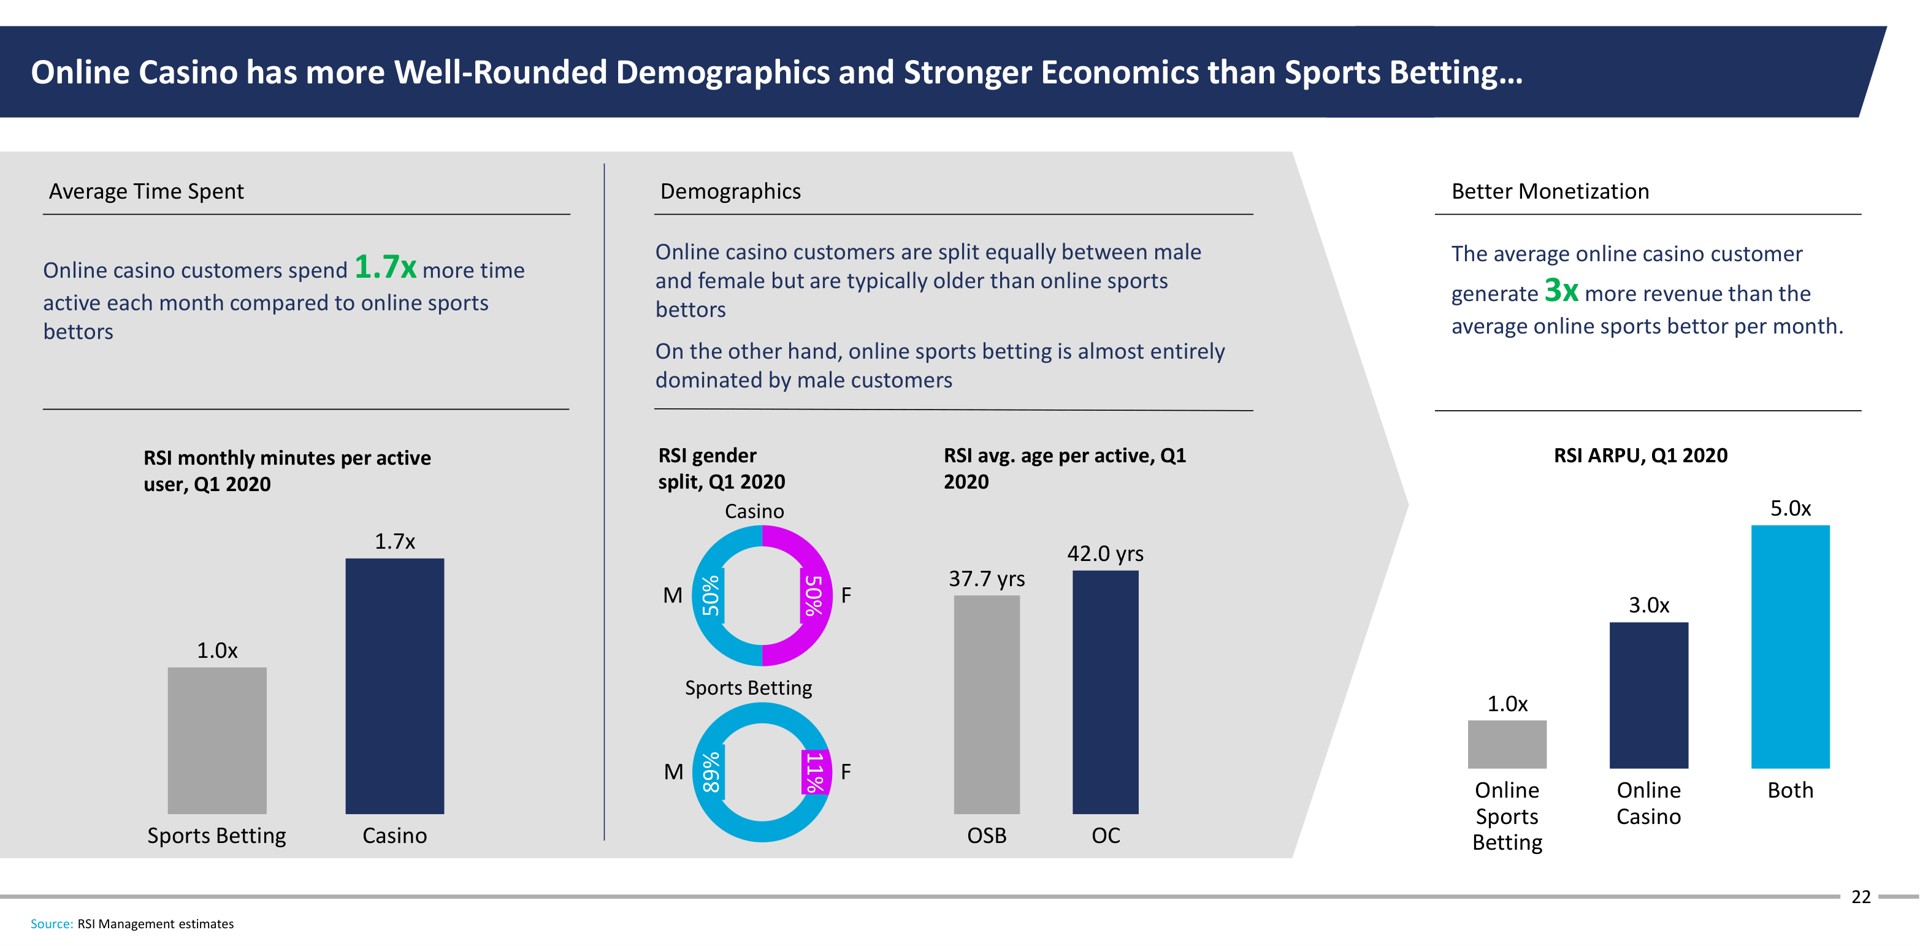 casino has more well rounded demographics and economics than sports betting | Rush Street